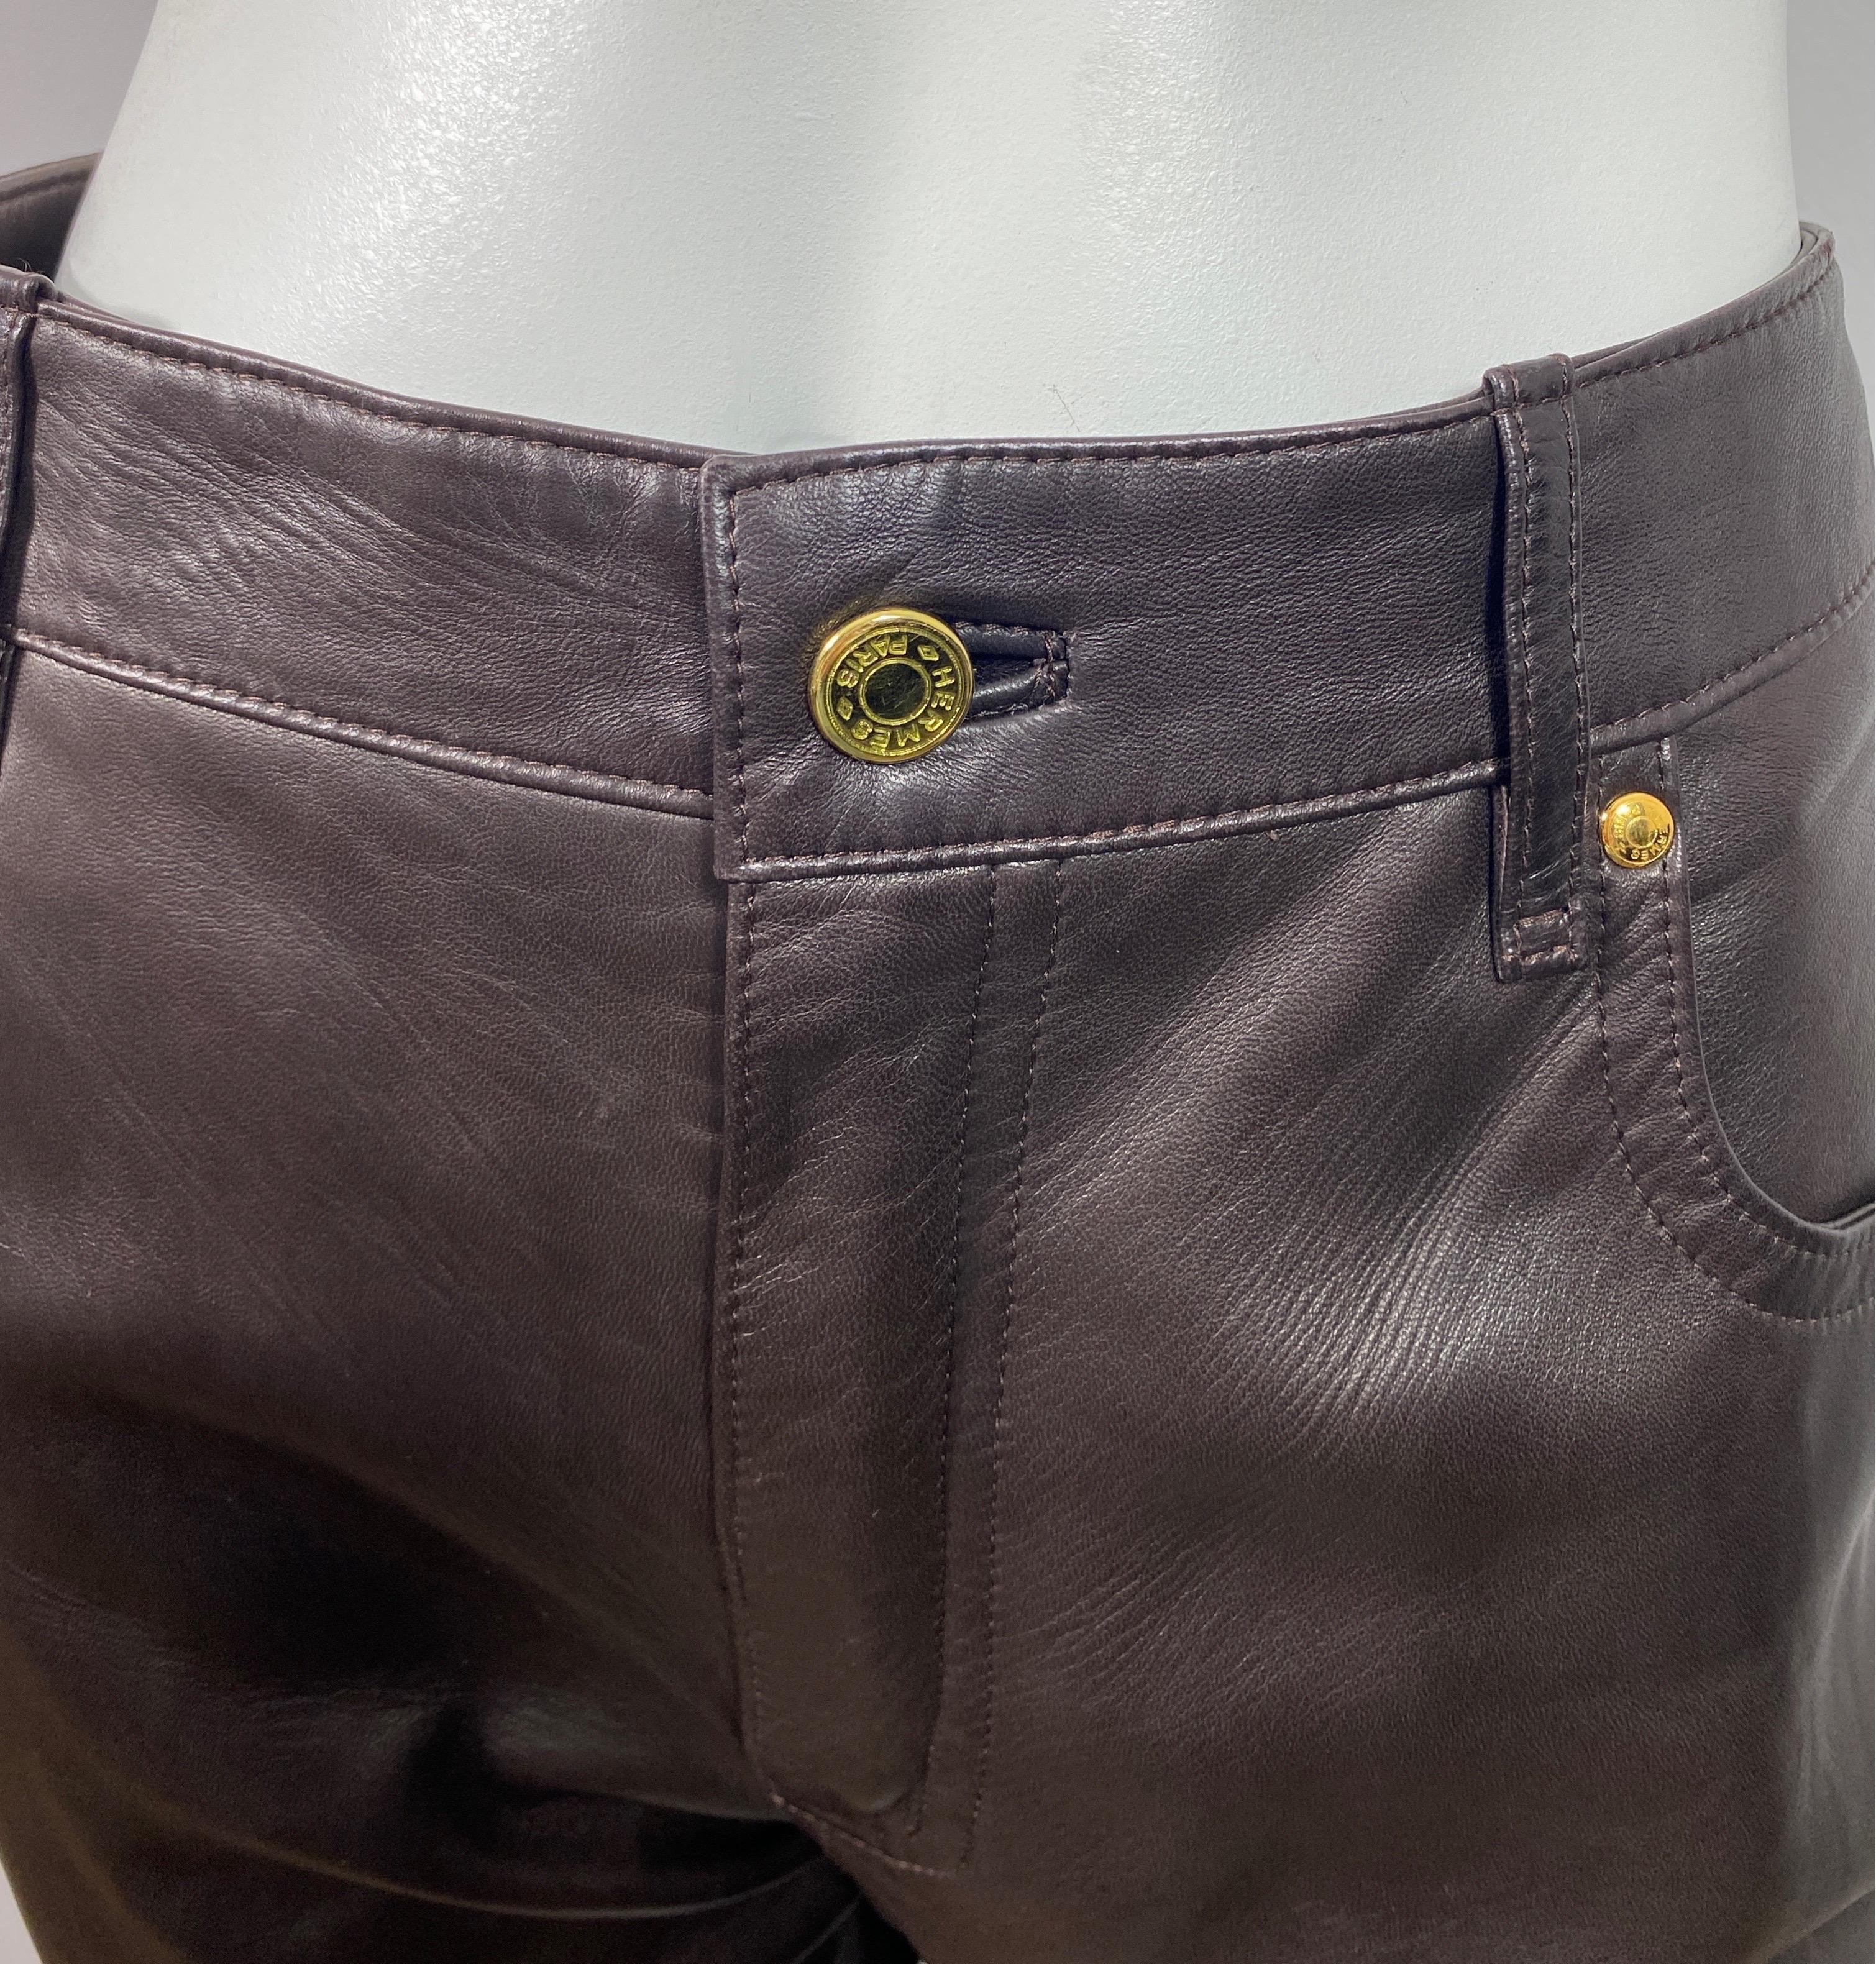 Hermes 1990’s Vintage Chocolate Brown Jean Style Leather Pants - Size 42 For Sale 2